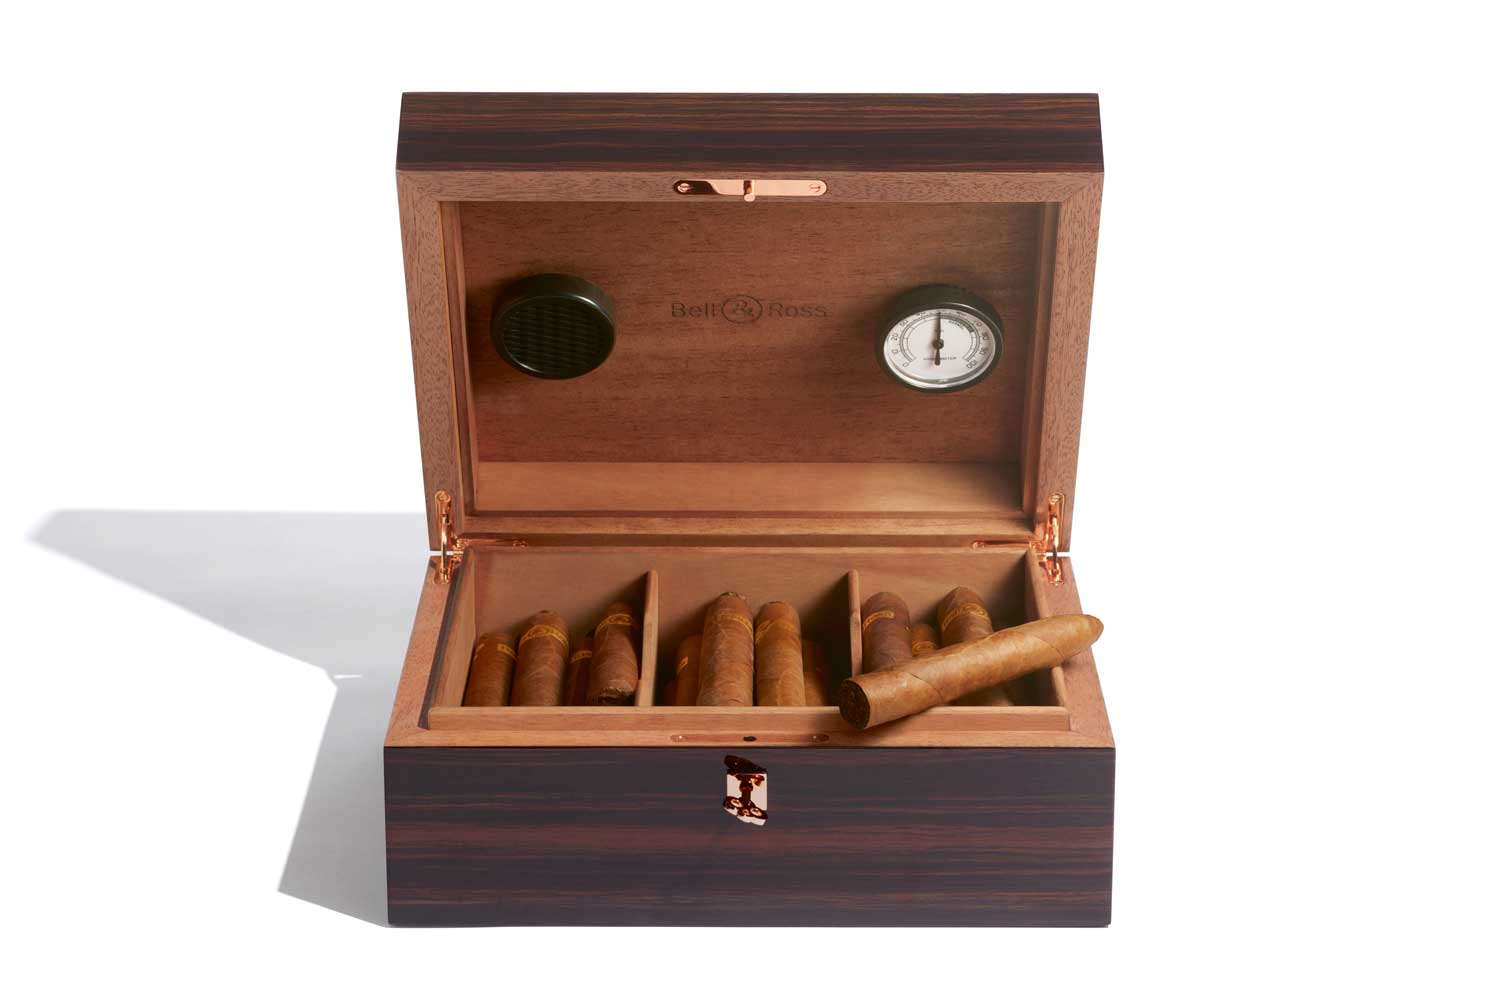 BR 05 Chrono Edición Limitada is delivered in a wooden box varnished in a rich ebony on the outside and cedar wood on the inside, which can be used as a functional humidor